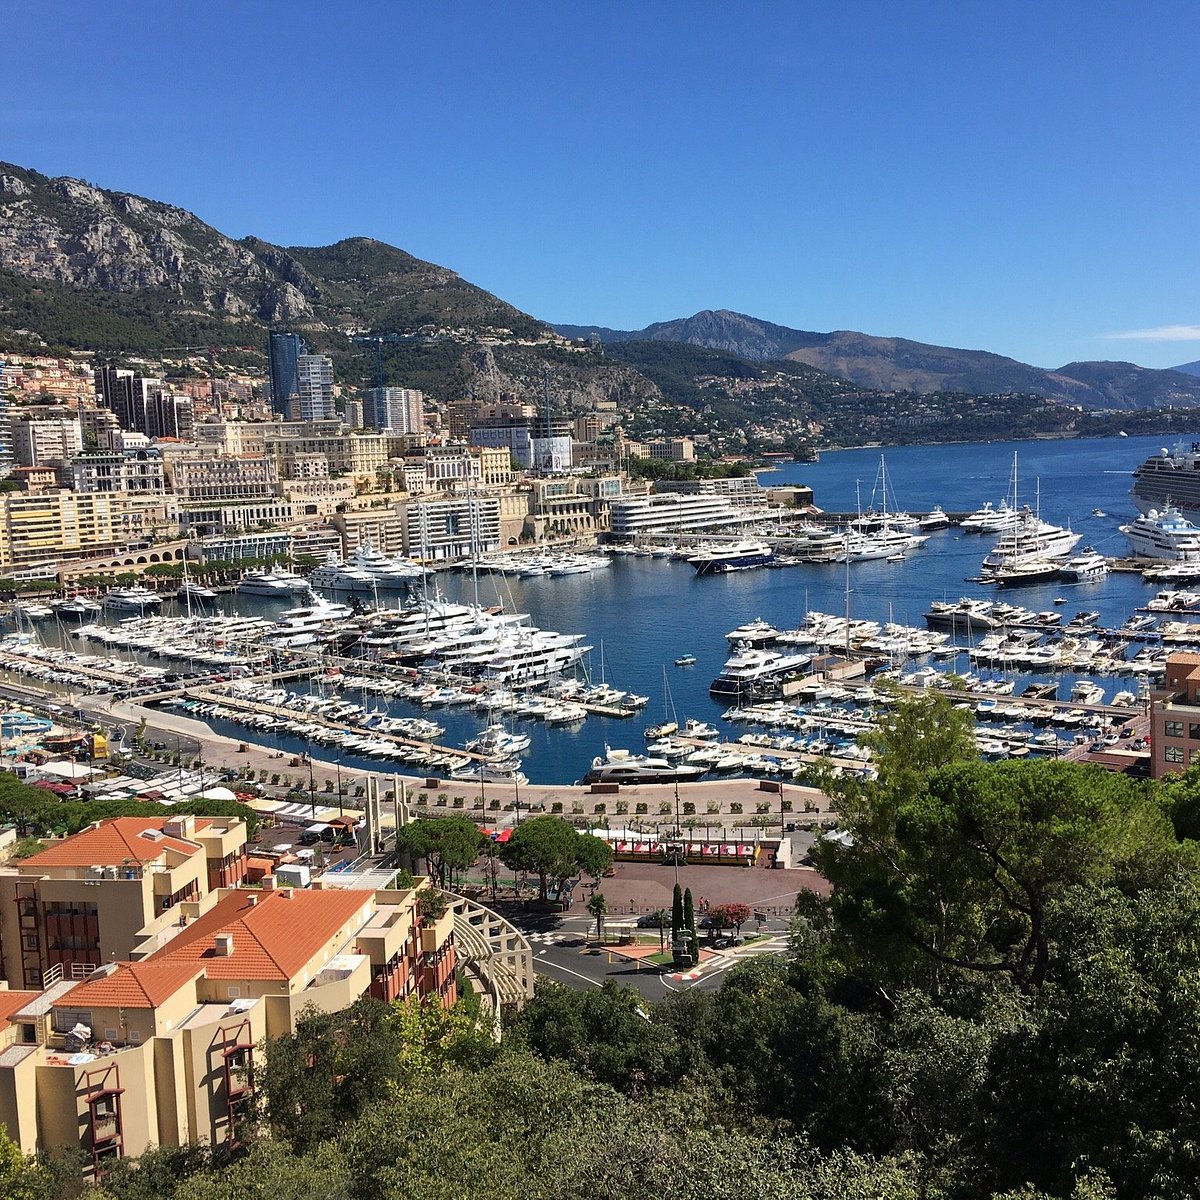 Here's What It's Like To Attend The Monaco Grand Prix As A VIP